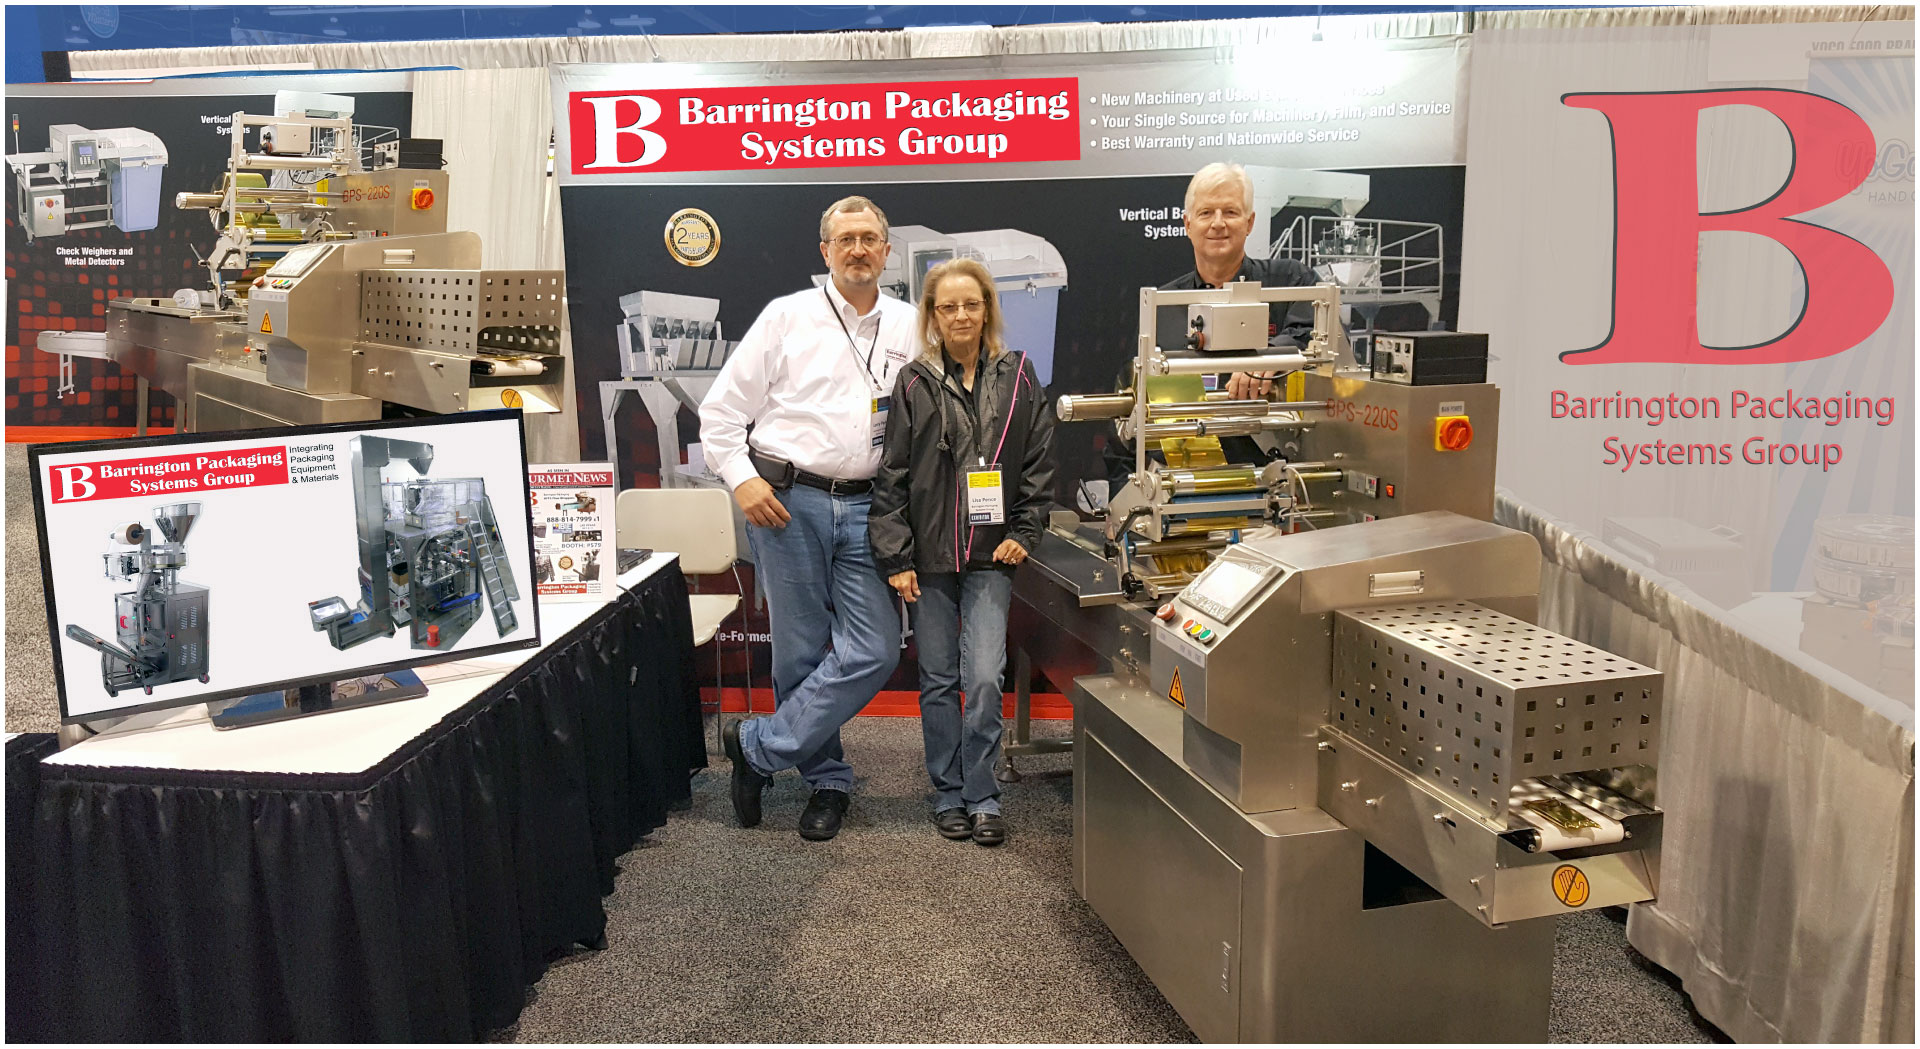 Barrington Packaging Systems Group Packaging Equipment Financing and Leasing Options 888-814-7999 Barrington Packaging offers affordable packaging equipment, high-quality packaging systems, new and used solutions for all of your packaging equipment needs